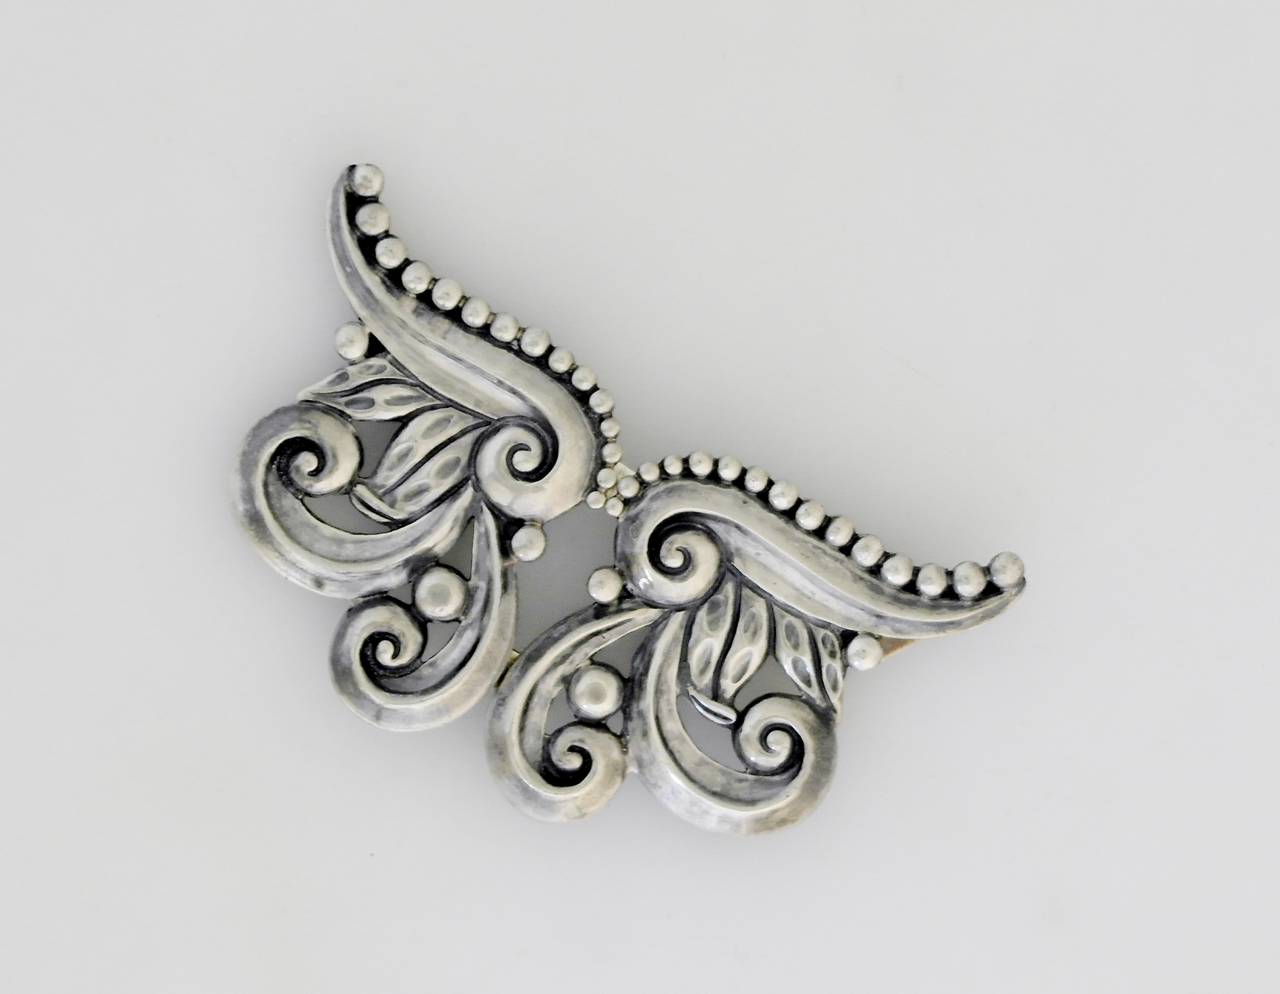 Being offered is a large sterling silver brooch by Margot de Taxco, of Mexico. Double hinged, two-sided large brooch, entirely handmade, with elegant scroll motifs. Dimensions: 3 7/8